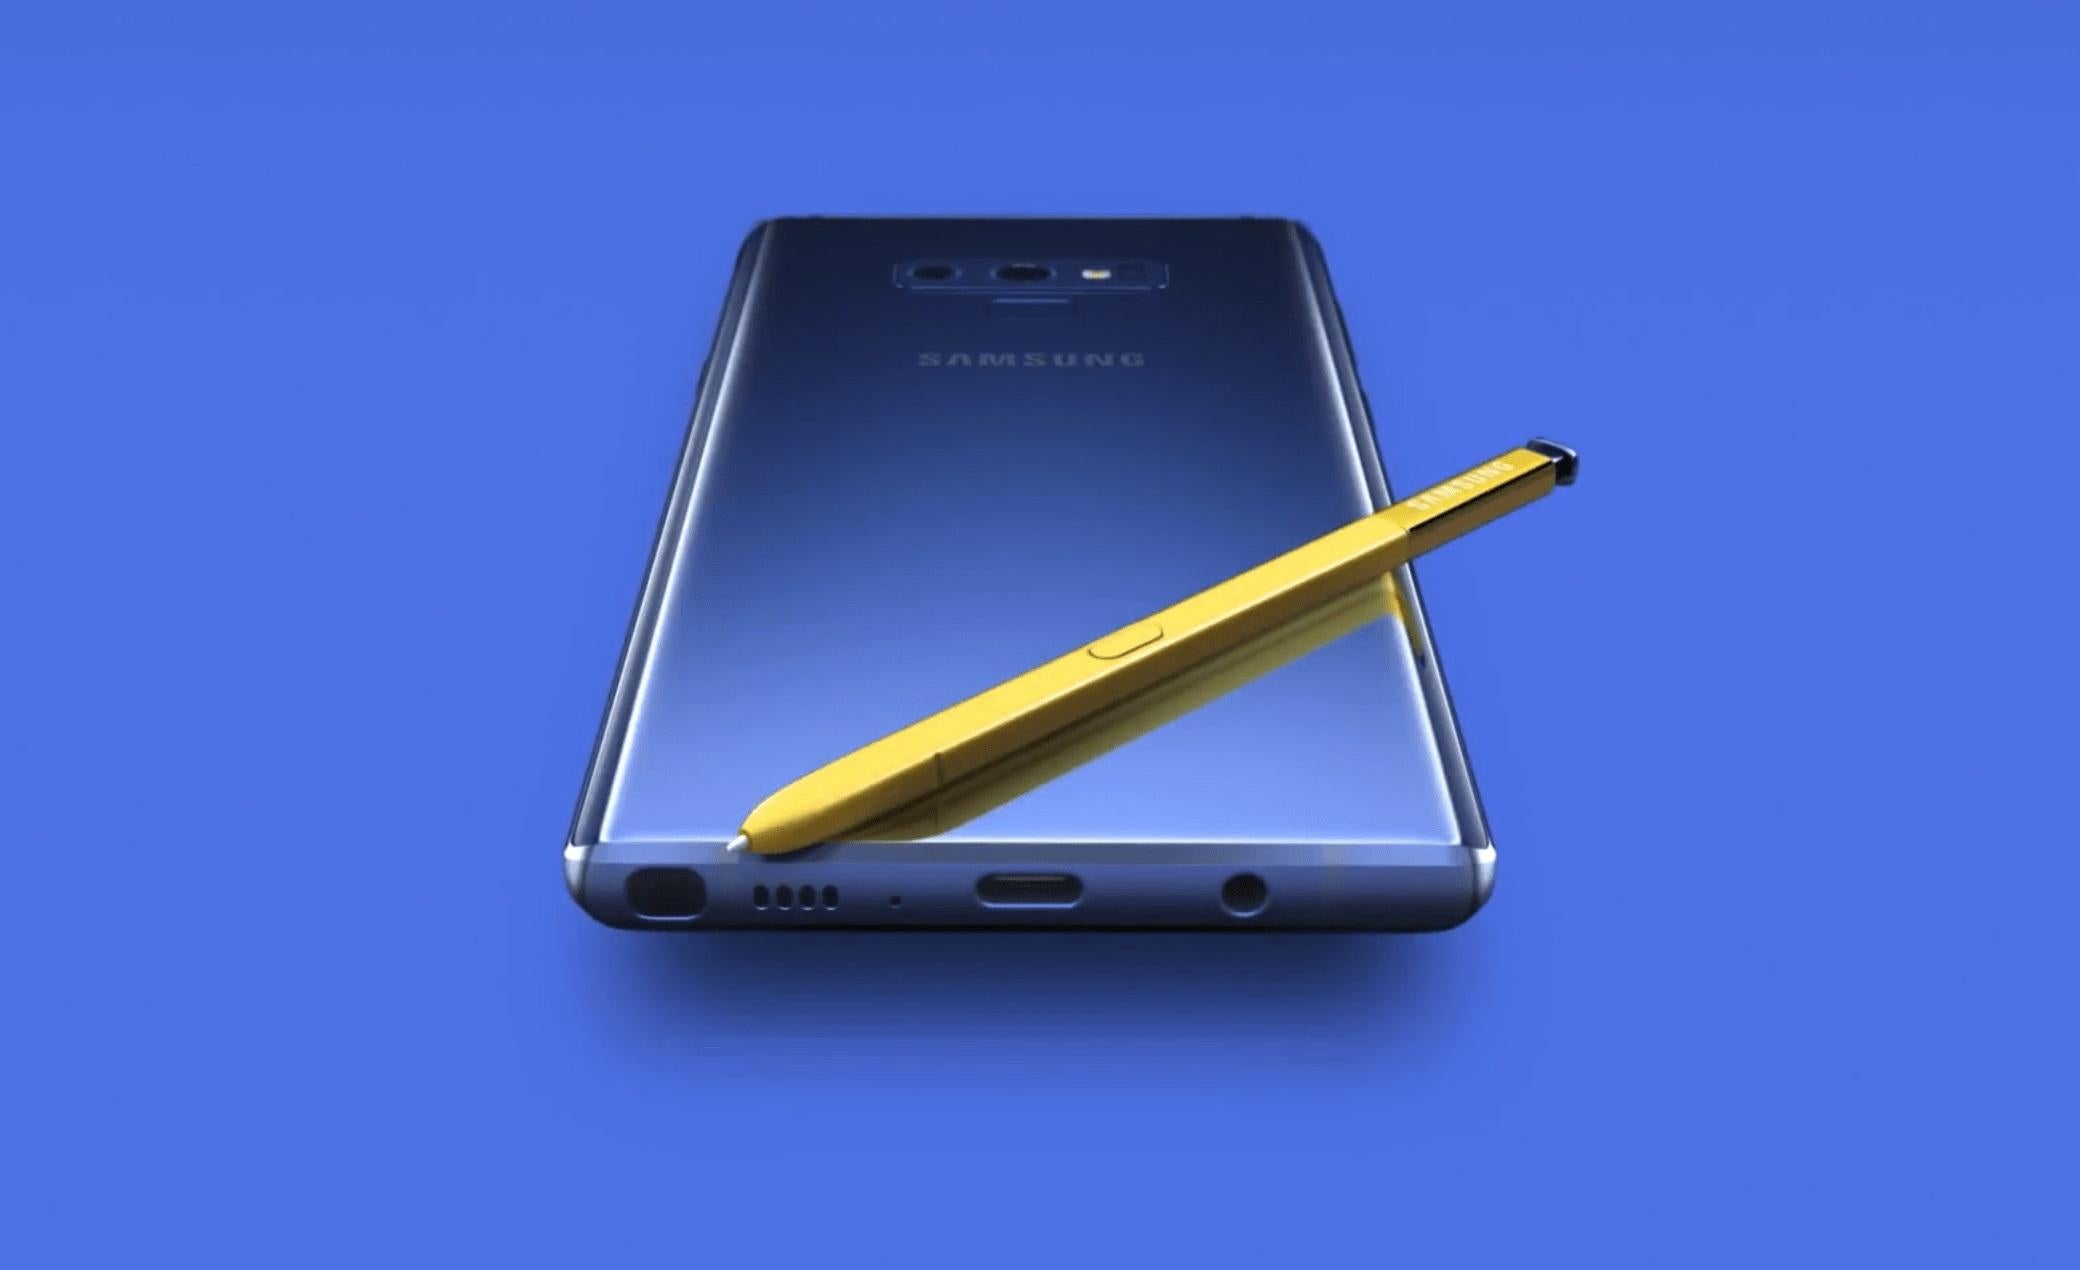 Some leaks of the Galaxy Note 9 have come directly from Samsung